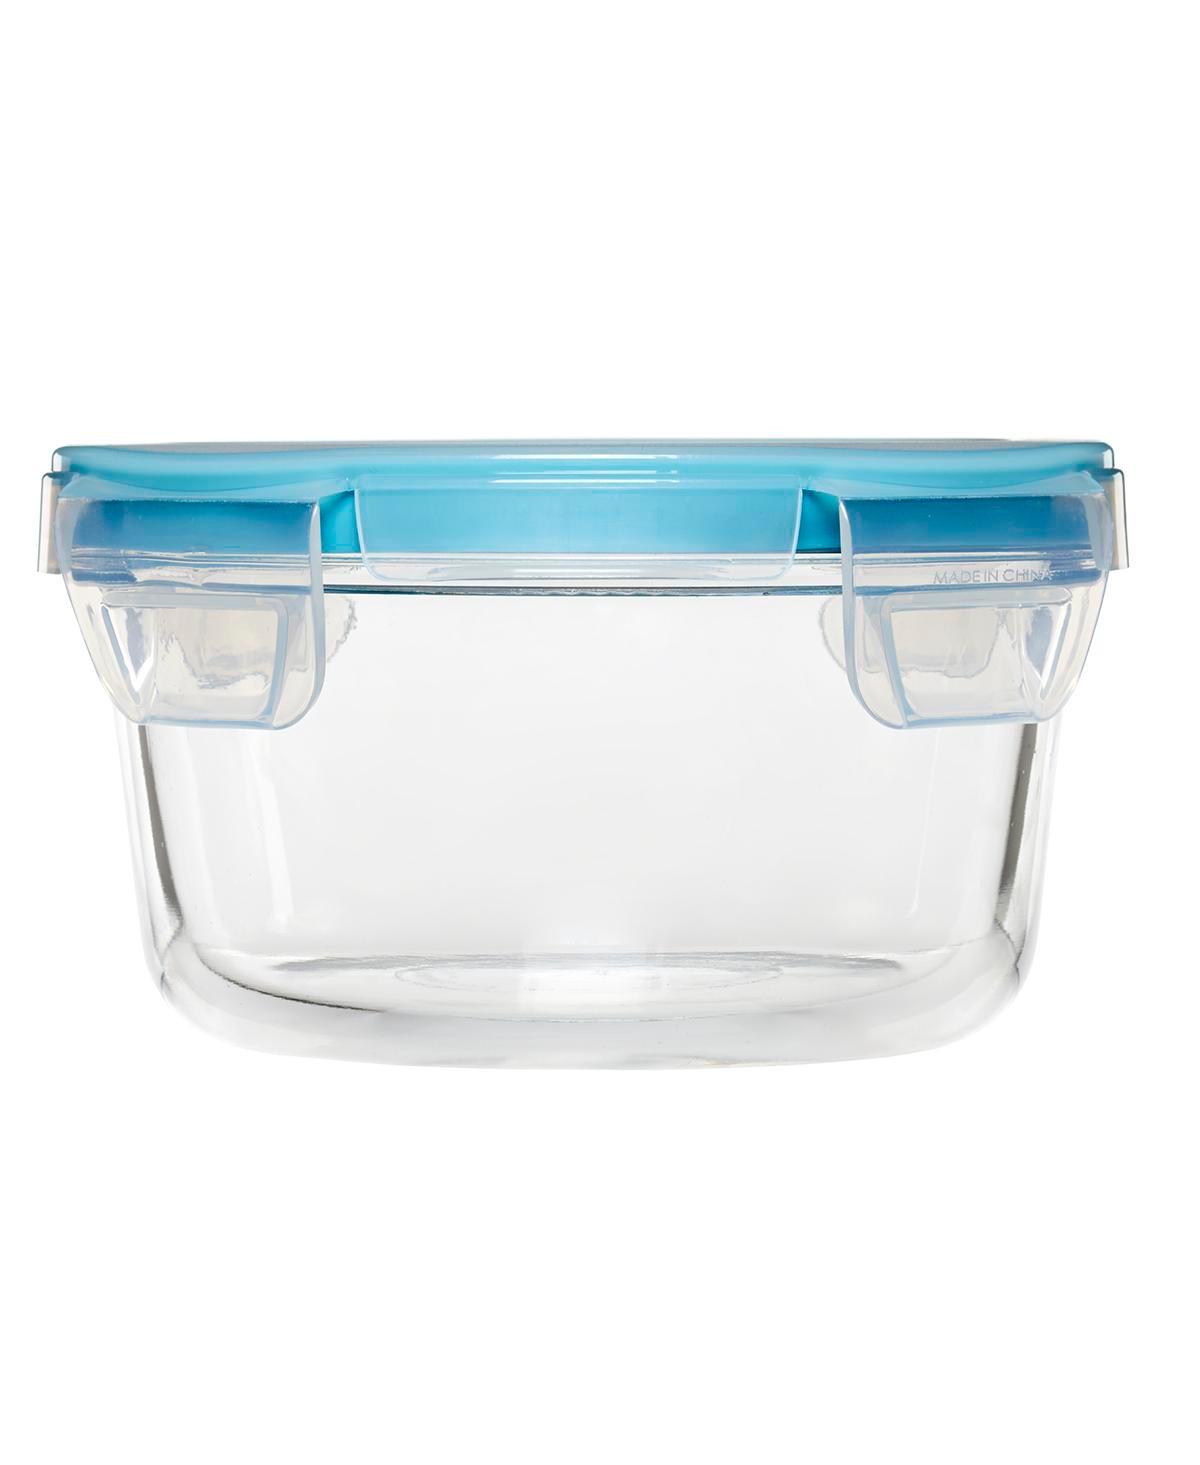 Anchor Hocking Glass 4 Cup Round Food Storage With Truelock Locking Lid, 2 Piece Set In Clear Glass,mineral Blue Lid